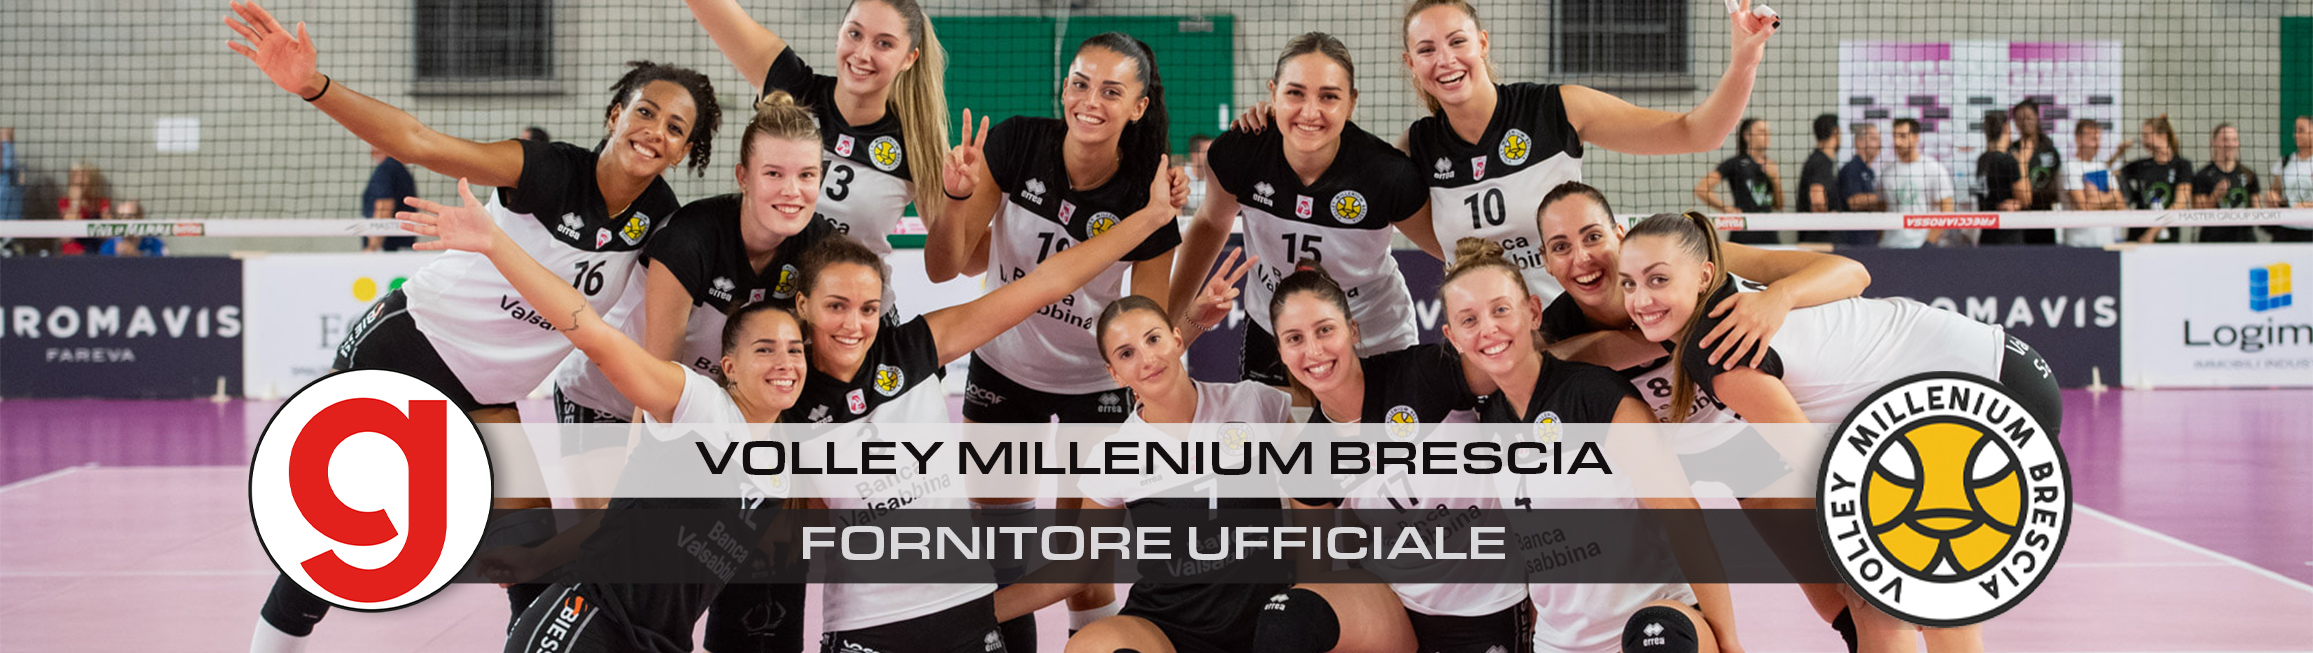 VOLLEY MILLENIUM BS FORNITORE UFFICIALE